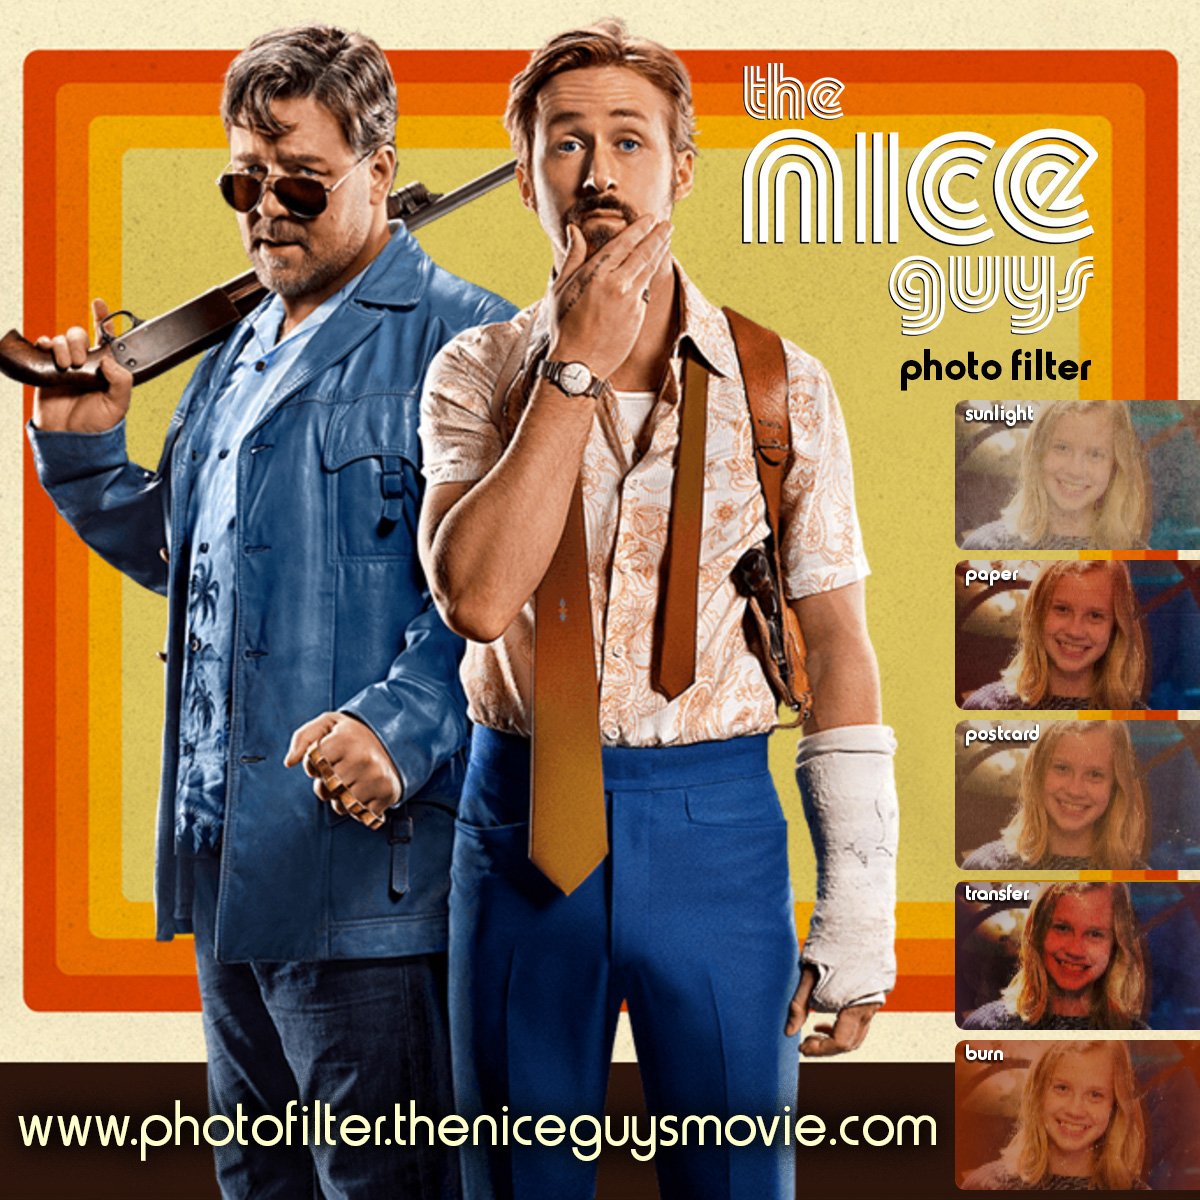 RT @theniceguys: Make your photo a little nicer with #TheNiceGuys photo filter: https://t.co/BZfMvYOpF5 https://t.co/z8G0WfVZR0